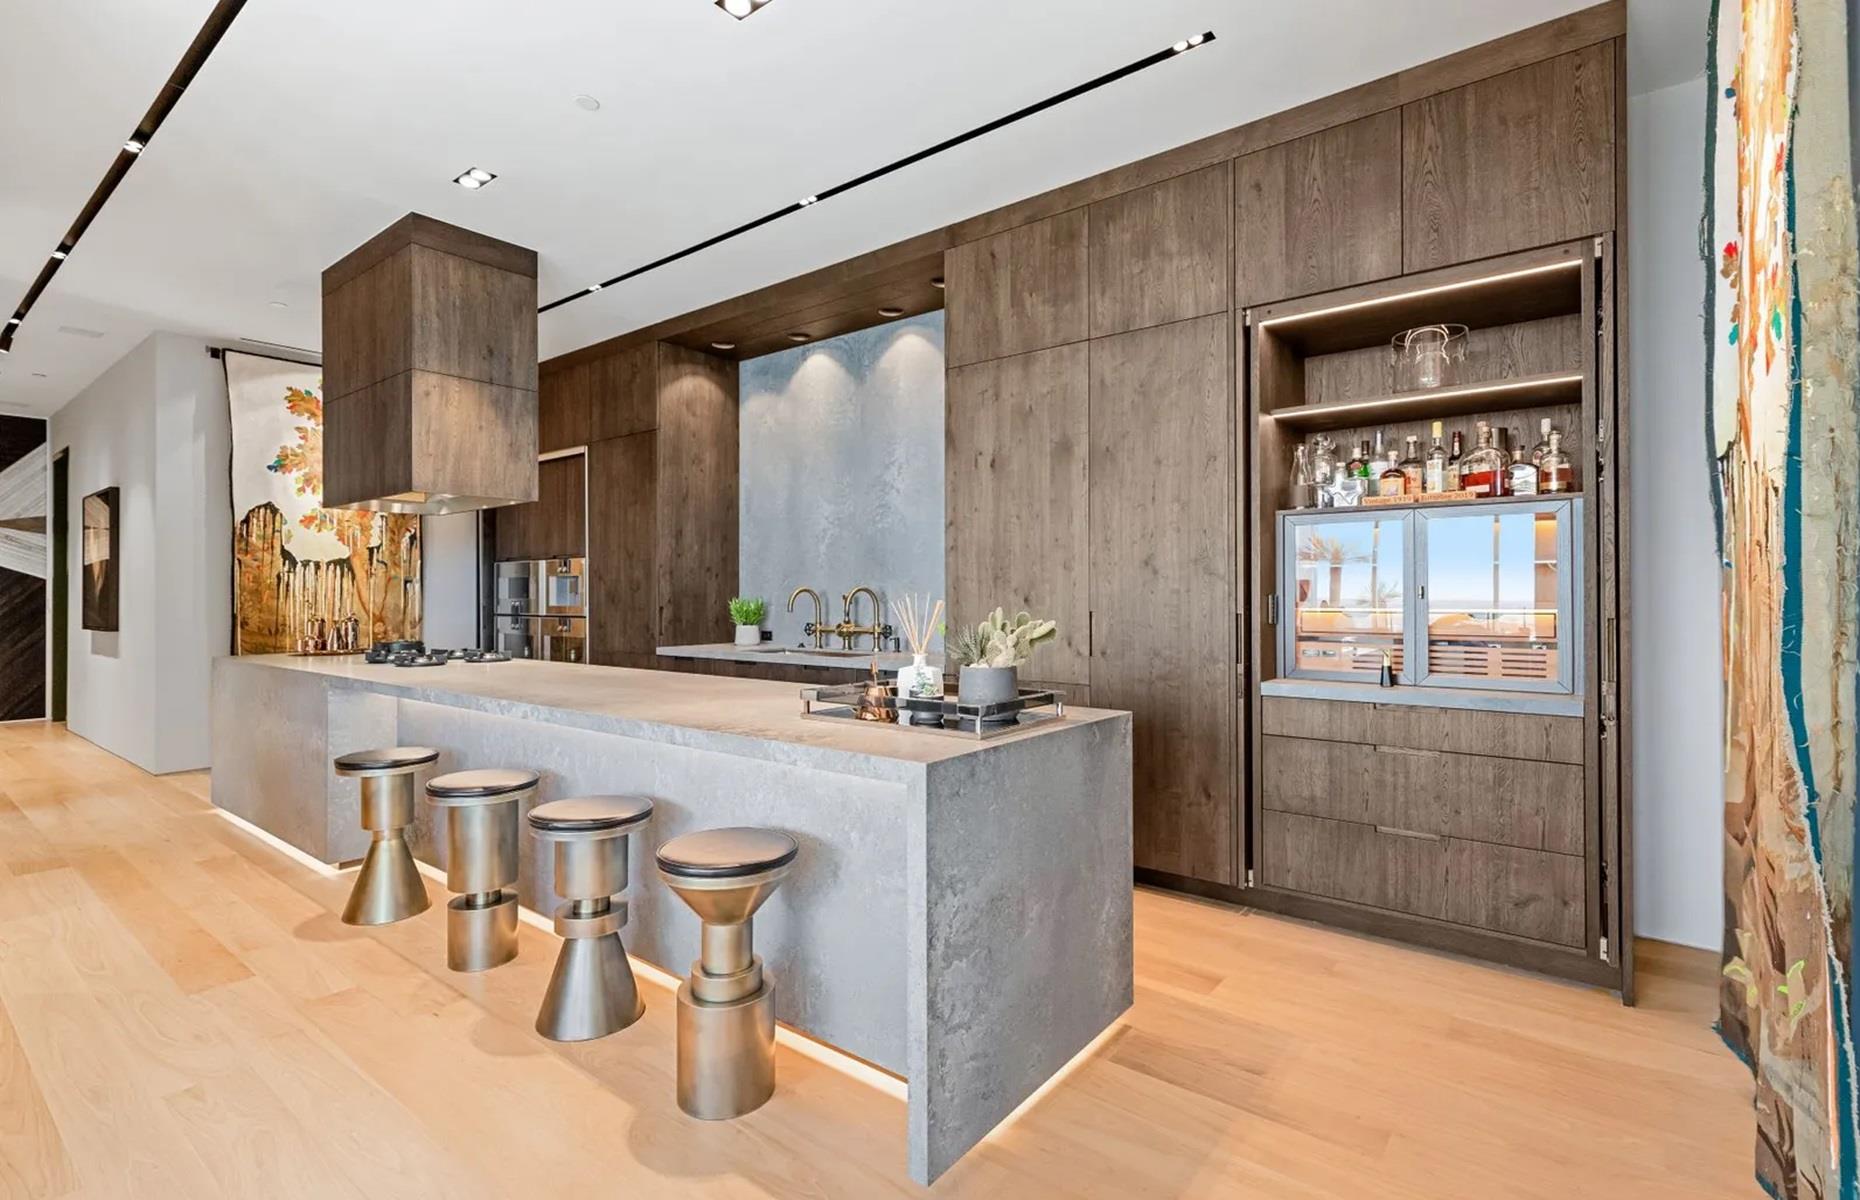 <p>As well as a huge living room, there’s also a formal dining room, a luxe kitchen with a floating center island, and ultra-pricey Gaggeneau appliances. There are also a few exterior terraces, where the lucky owner can take in dreamy views of Austin, including the skyline and Lady Bird Lake.  </p>